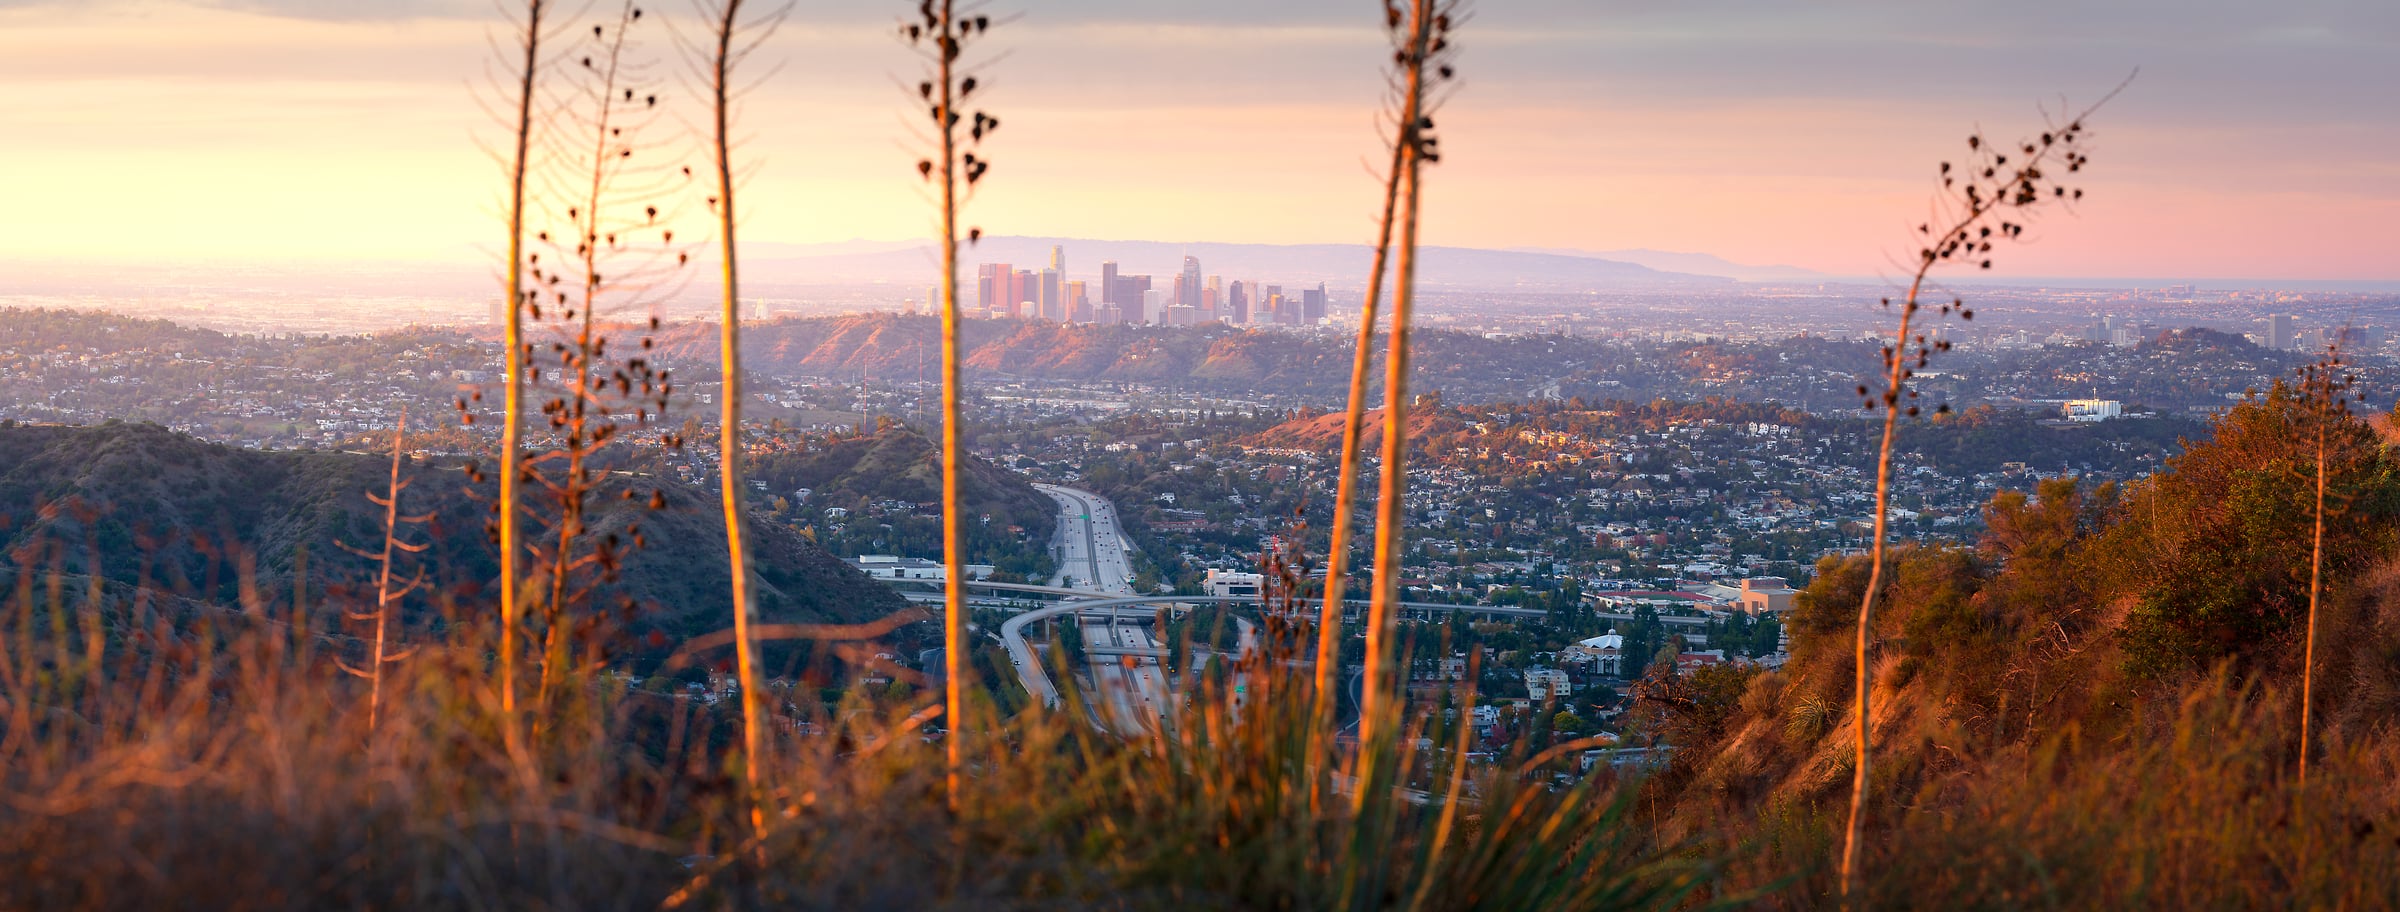 202 megapixels! A very high resolution, large-format VAST photo print of the Los Angeles skyline at sunrise with plants in the foreground; photograph created by Jeff Lewis in Los Angeles, California.